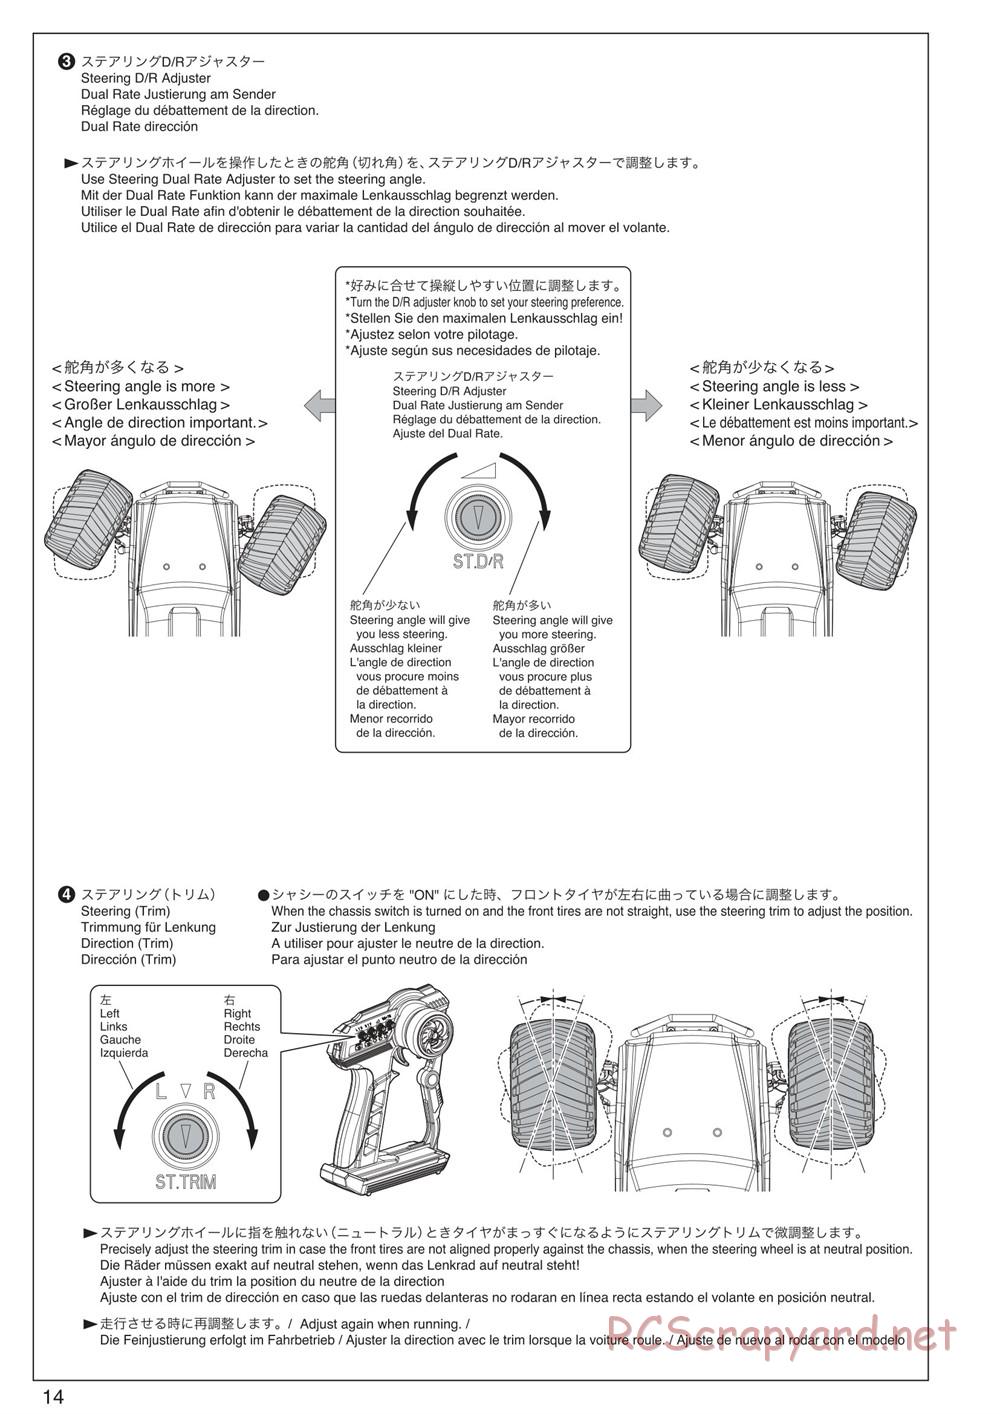 Kyosho - Monster Tracker EP - Manual - Page 14